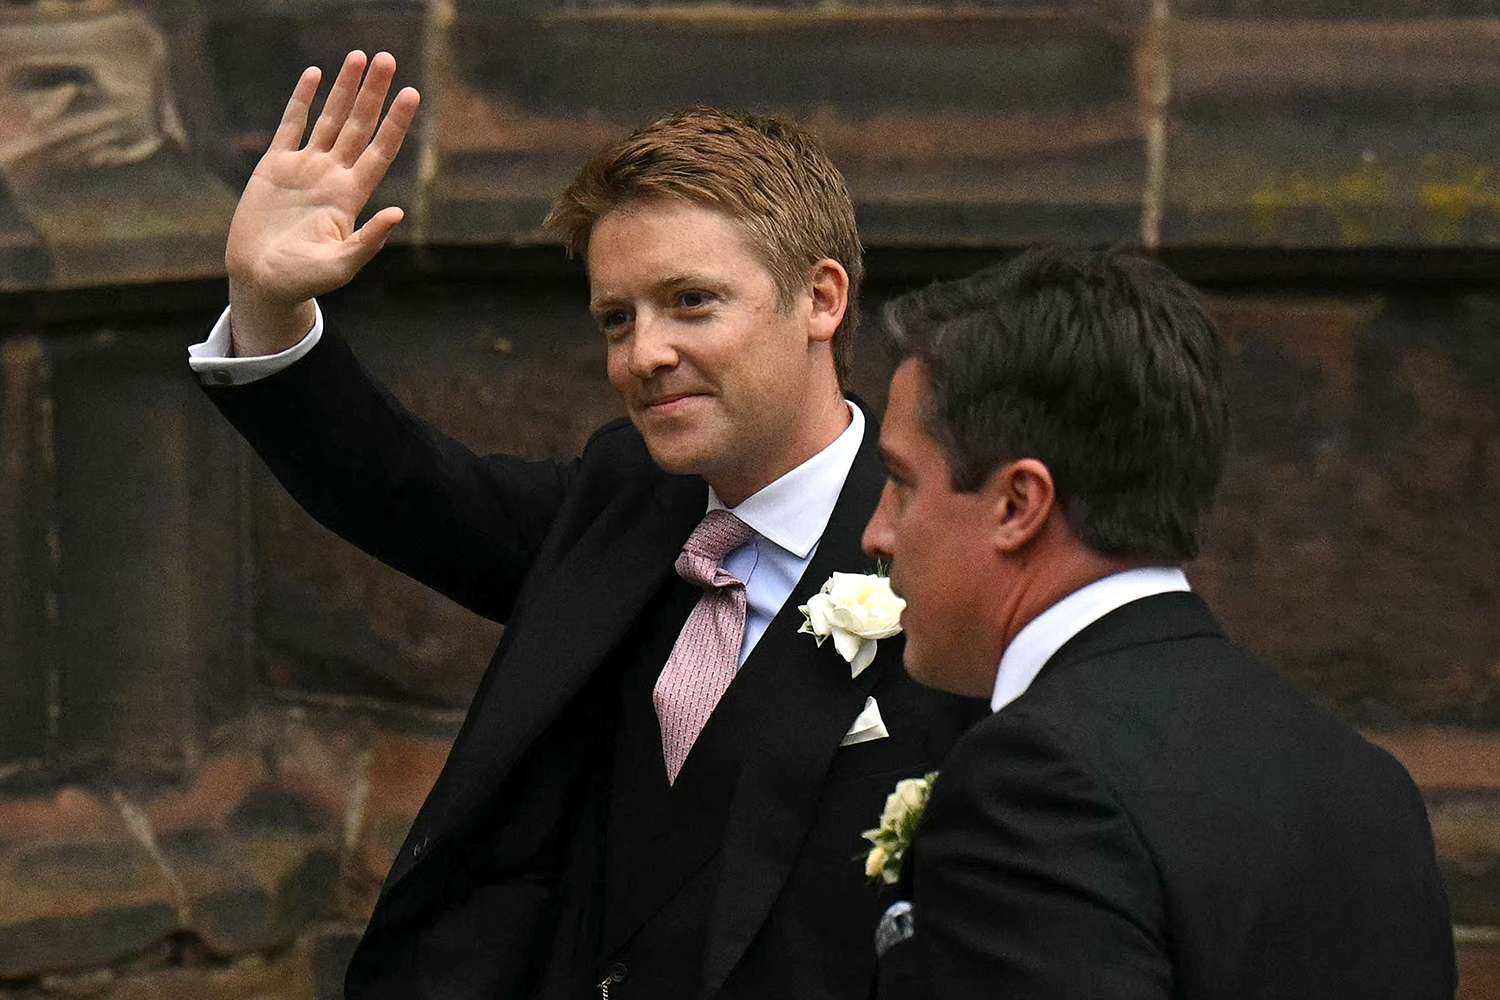 Hugh Grosvenor, Duke of Westminster (L), arrives for his wedding at Chester Cathedral in Chester